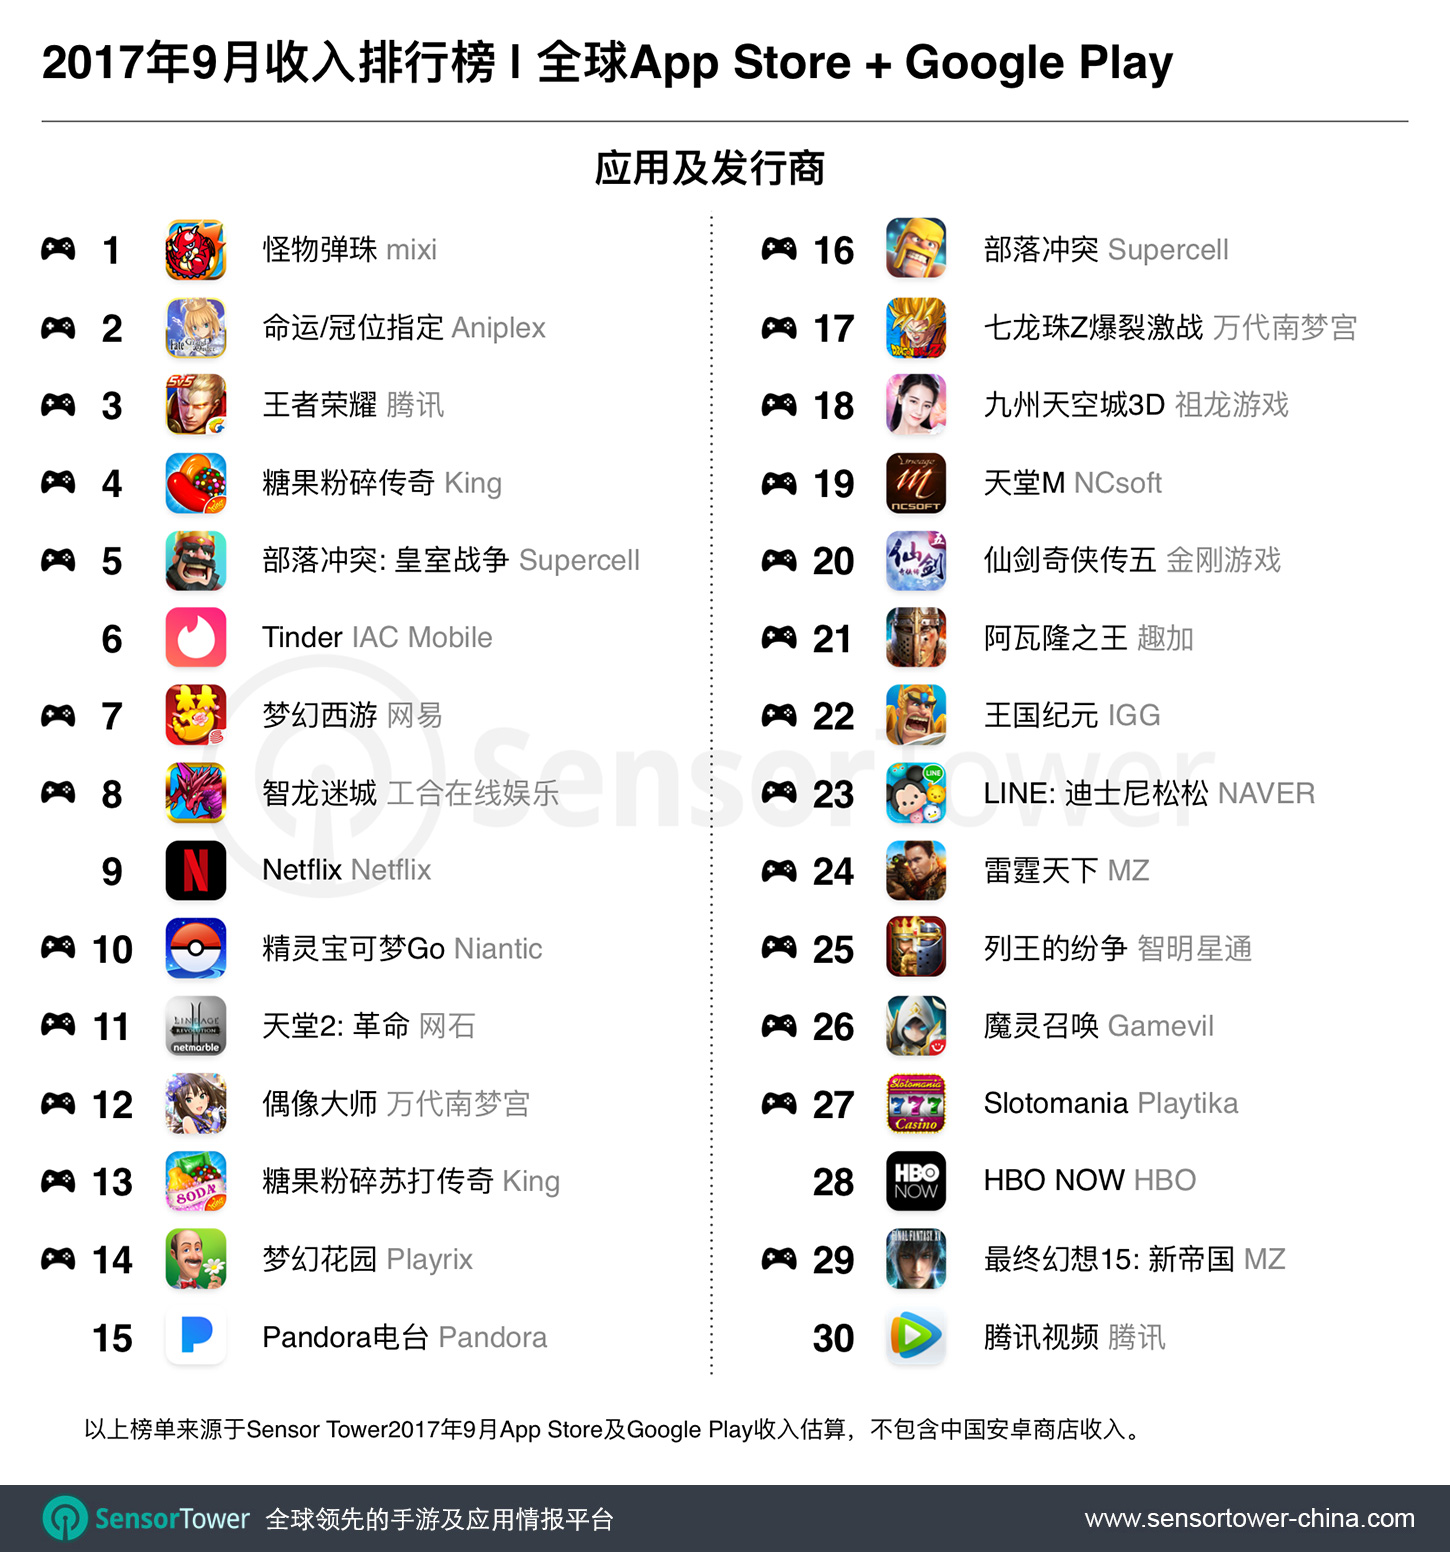 Worldwide top 30 apps by revenue for September 2017